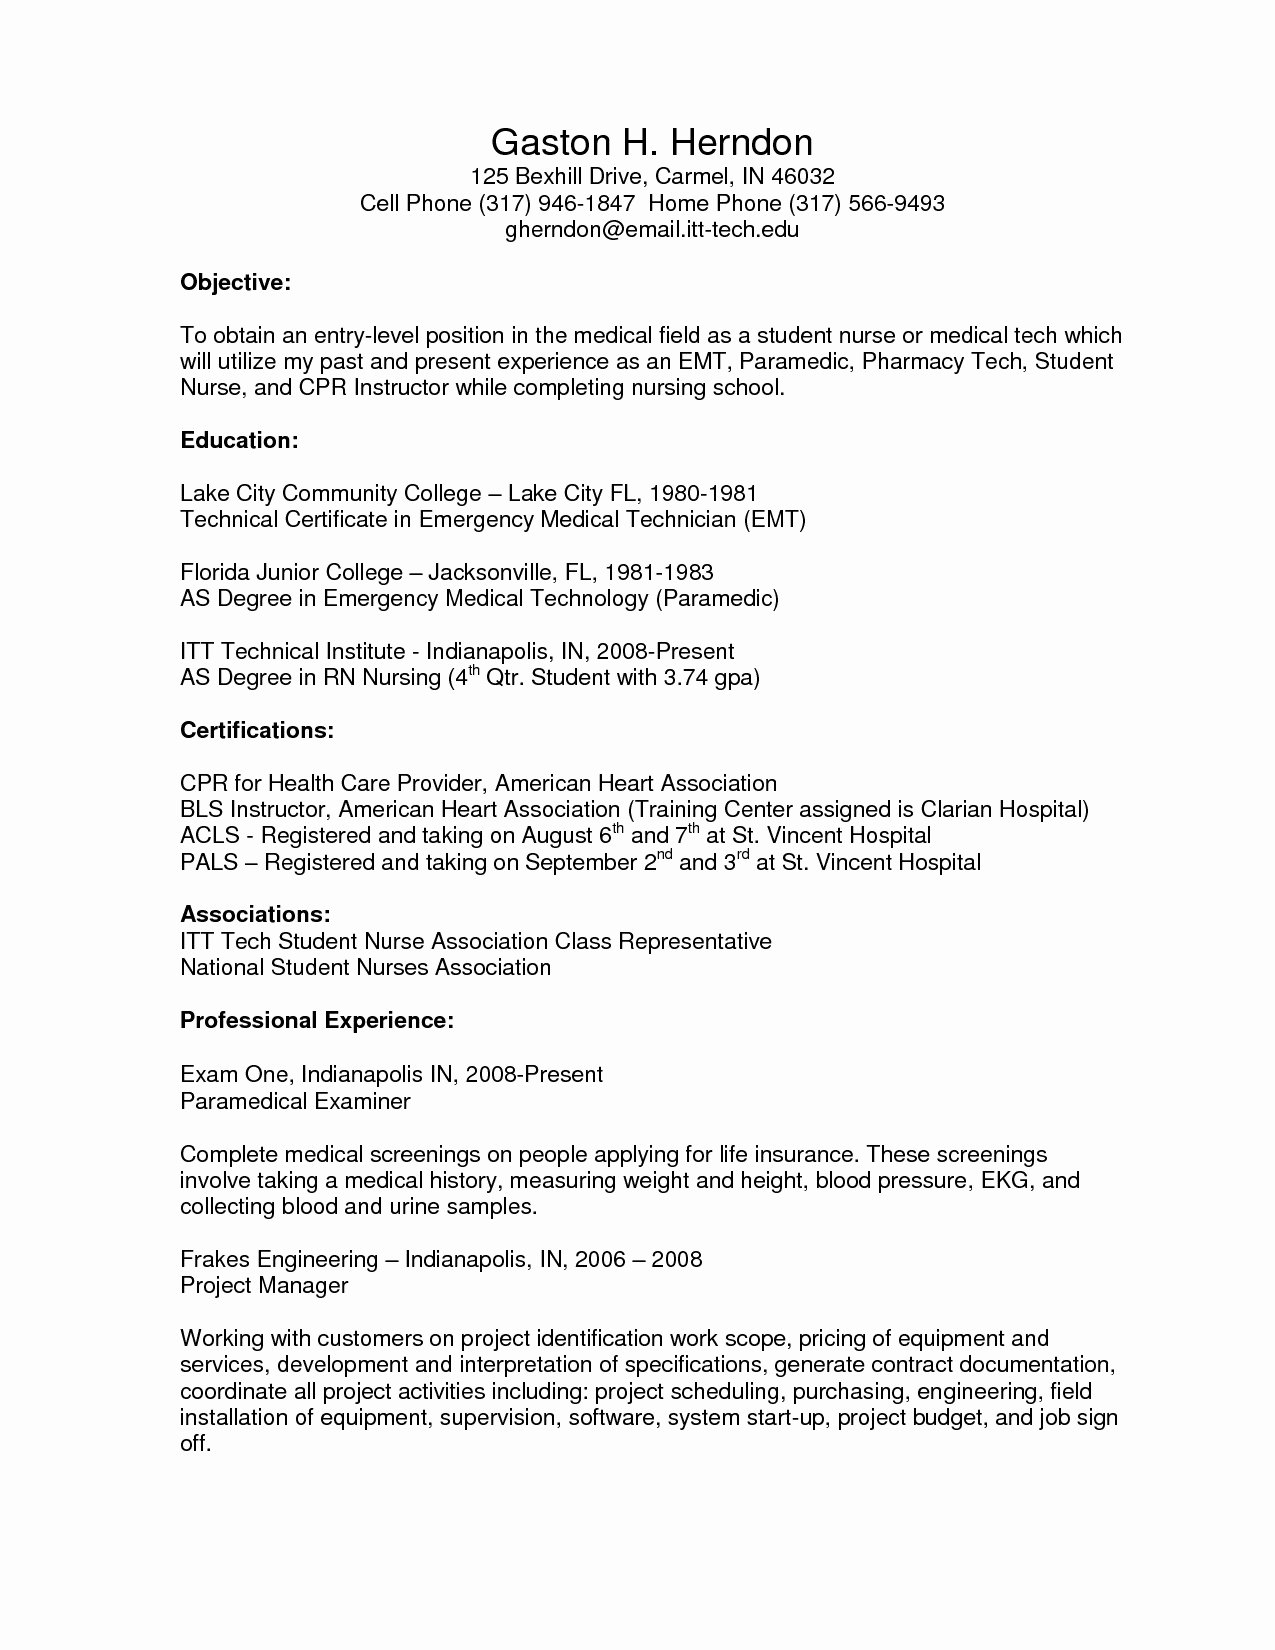 General Entry Level Resume Ideas General Entry Level